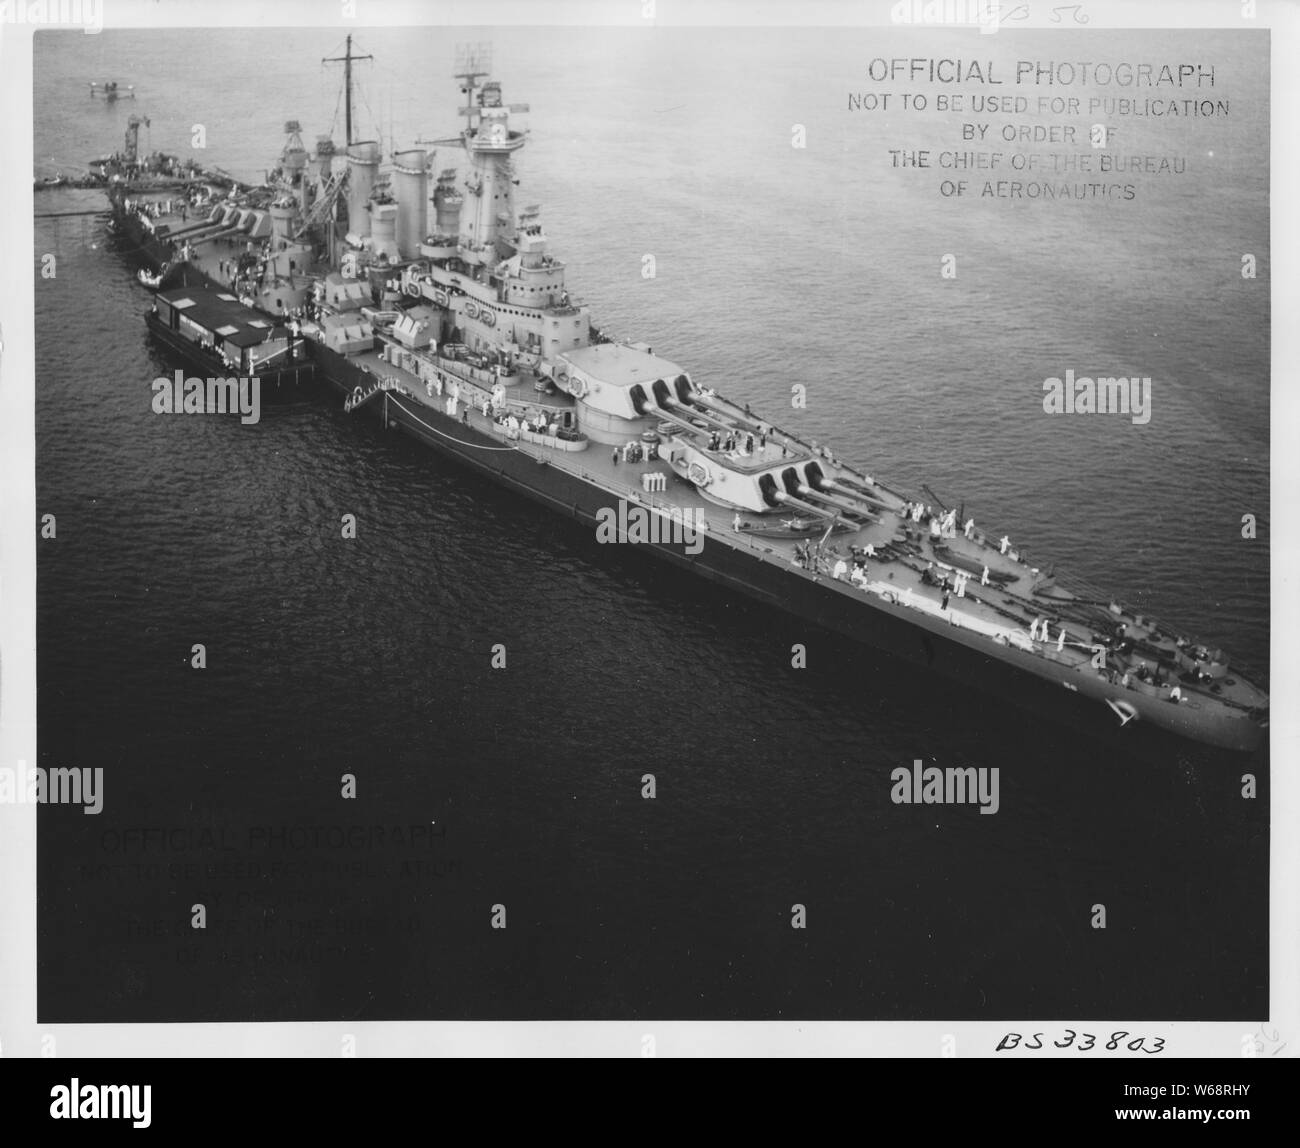 BB56 21 AUG 1942  Altitude 200' - 400'; Aerial view of the USS Washington from 200 to 400 feet. Box: 19LCM, BB-55 to BB-56; Folder: F / BS 33799 - 33803  BS 33803; NYNY# 731  NAS NYNY Photographic Library Stock Photo